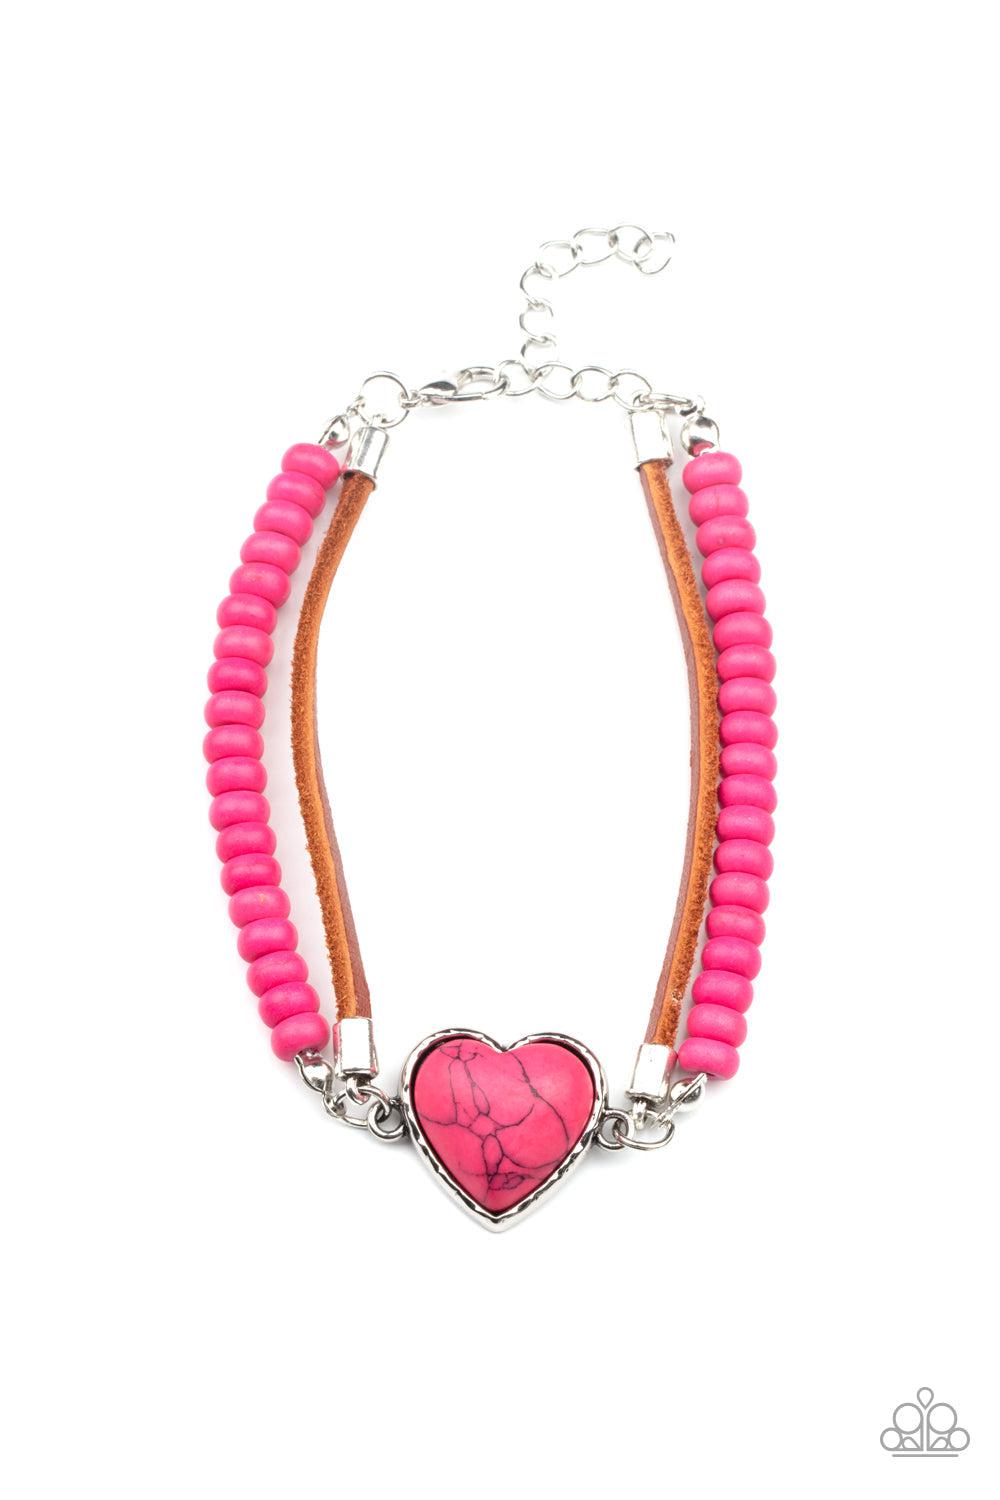 Charmingly Country Pink Stone Heart Bracelet - Paparazzi Accessories- lightbox - CarasShop.com - $5 Jewelry by Cara Jewels